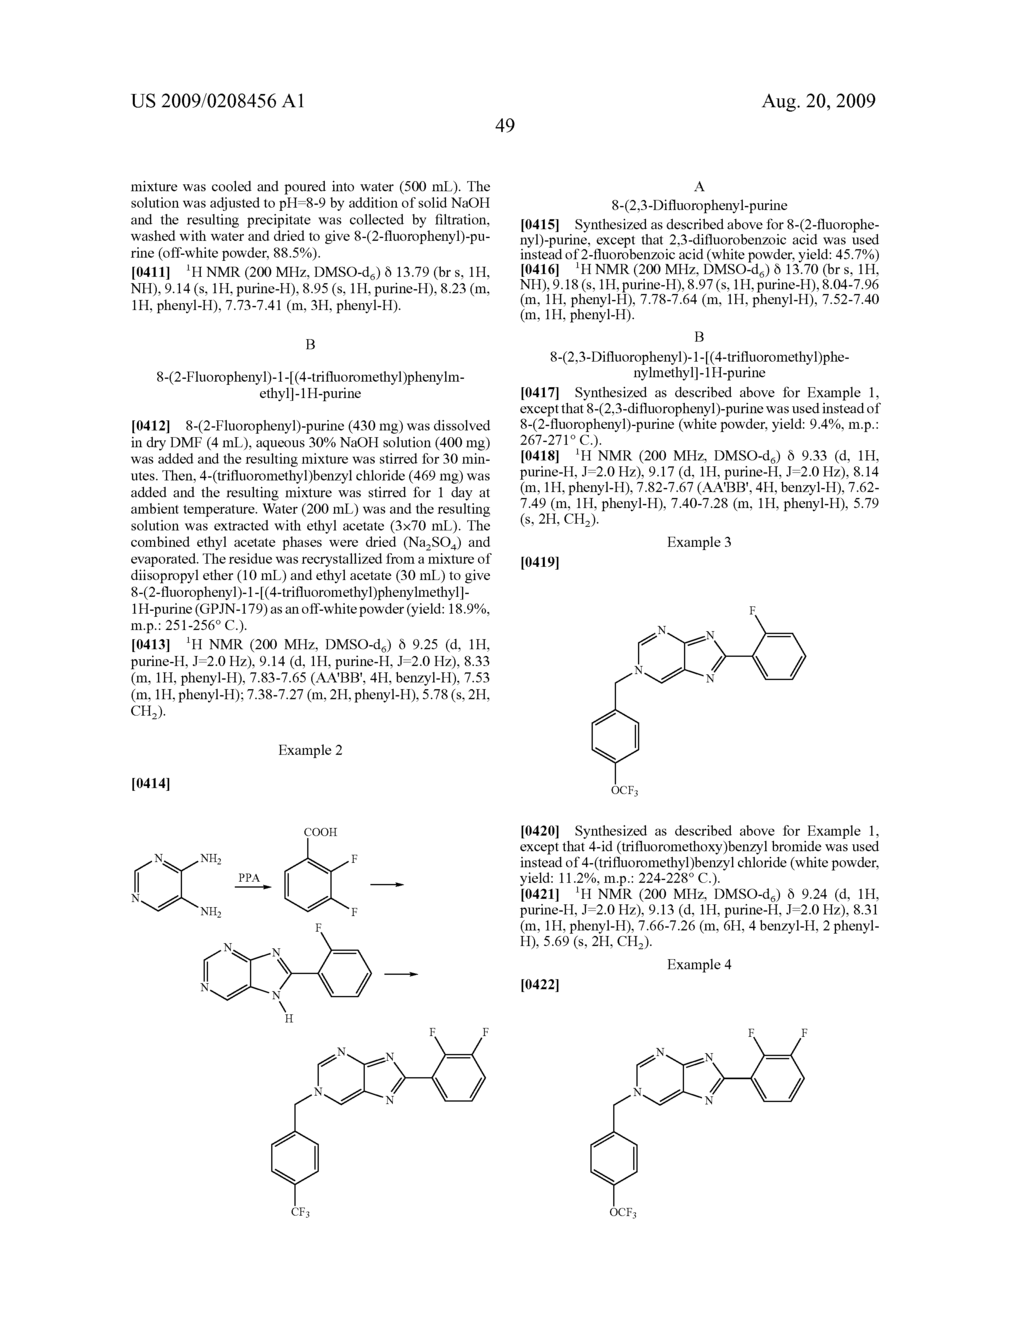 Imidazo[4,5-d]pyrimidines, their uses and methods of preparation - diagram, schematic, and image 50